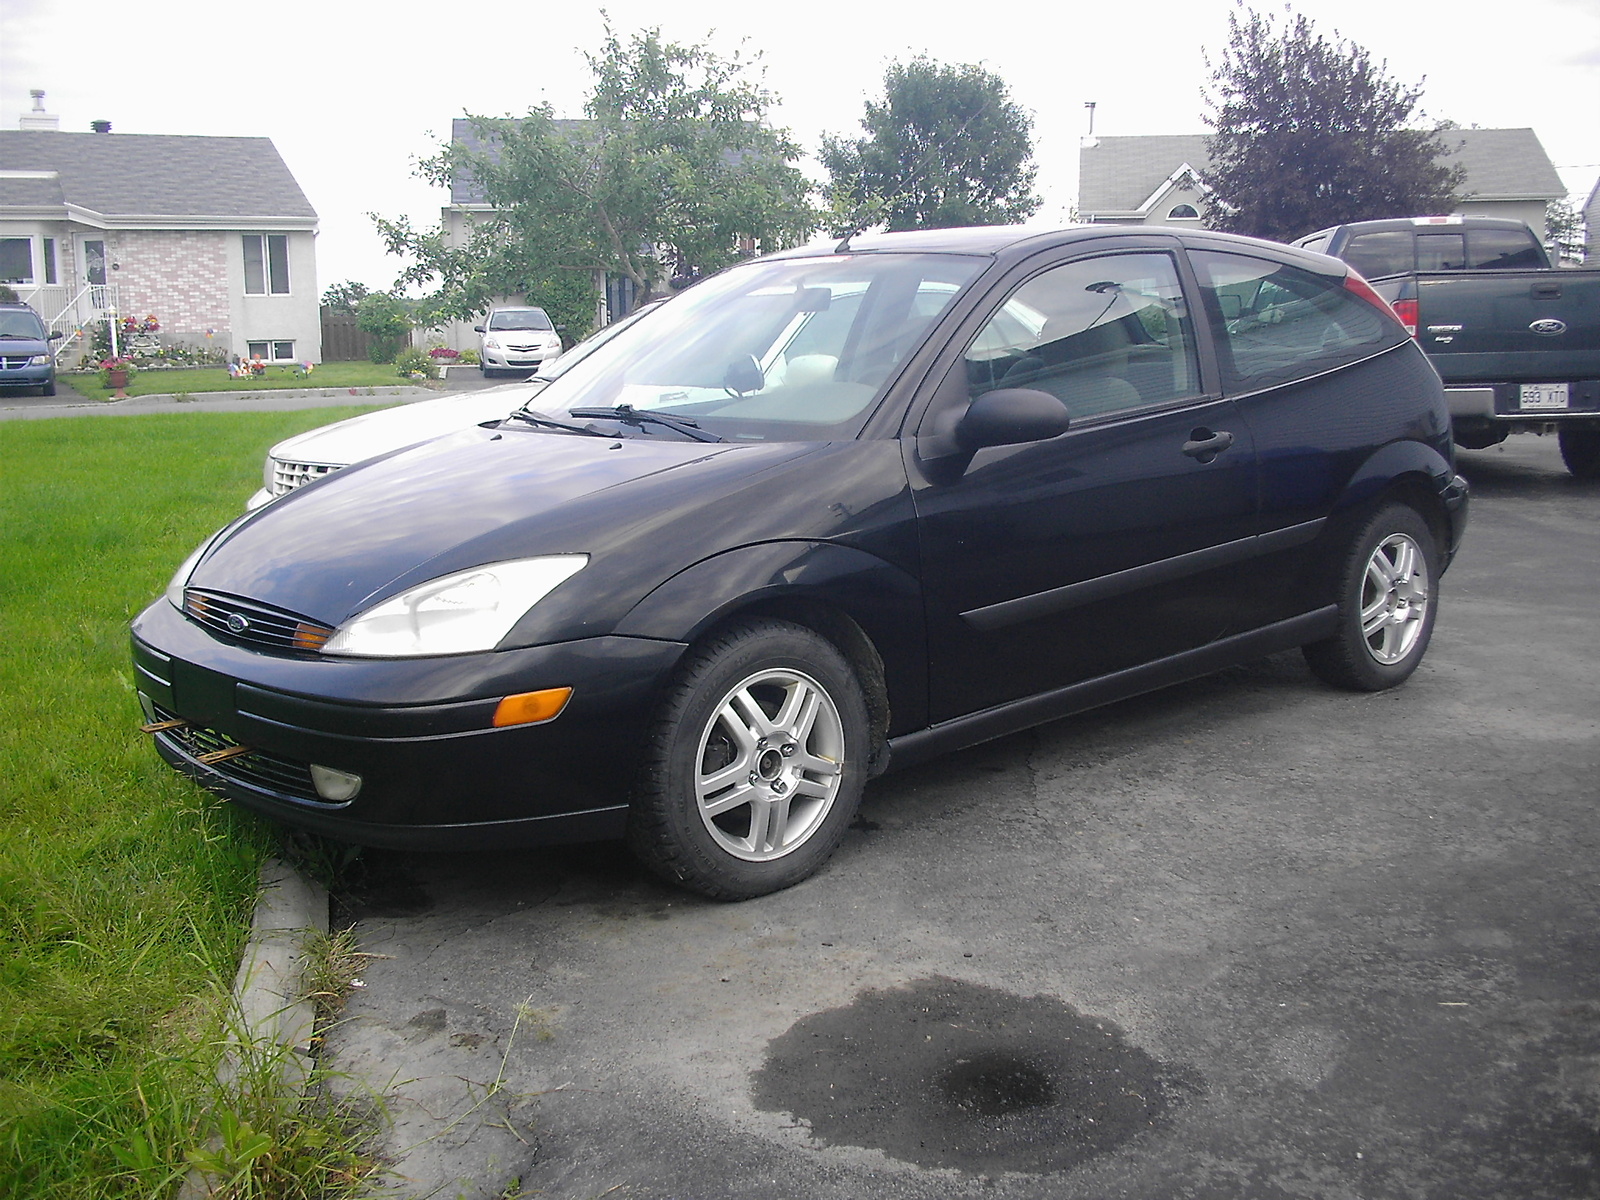 2000 Ford focus zx3 consumer review #7